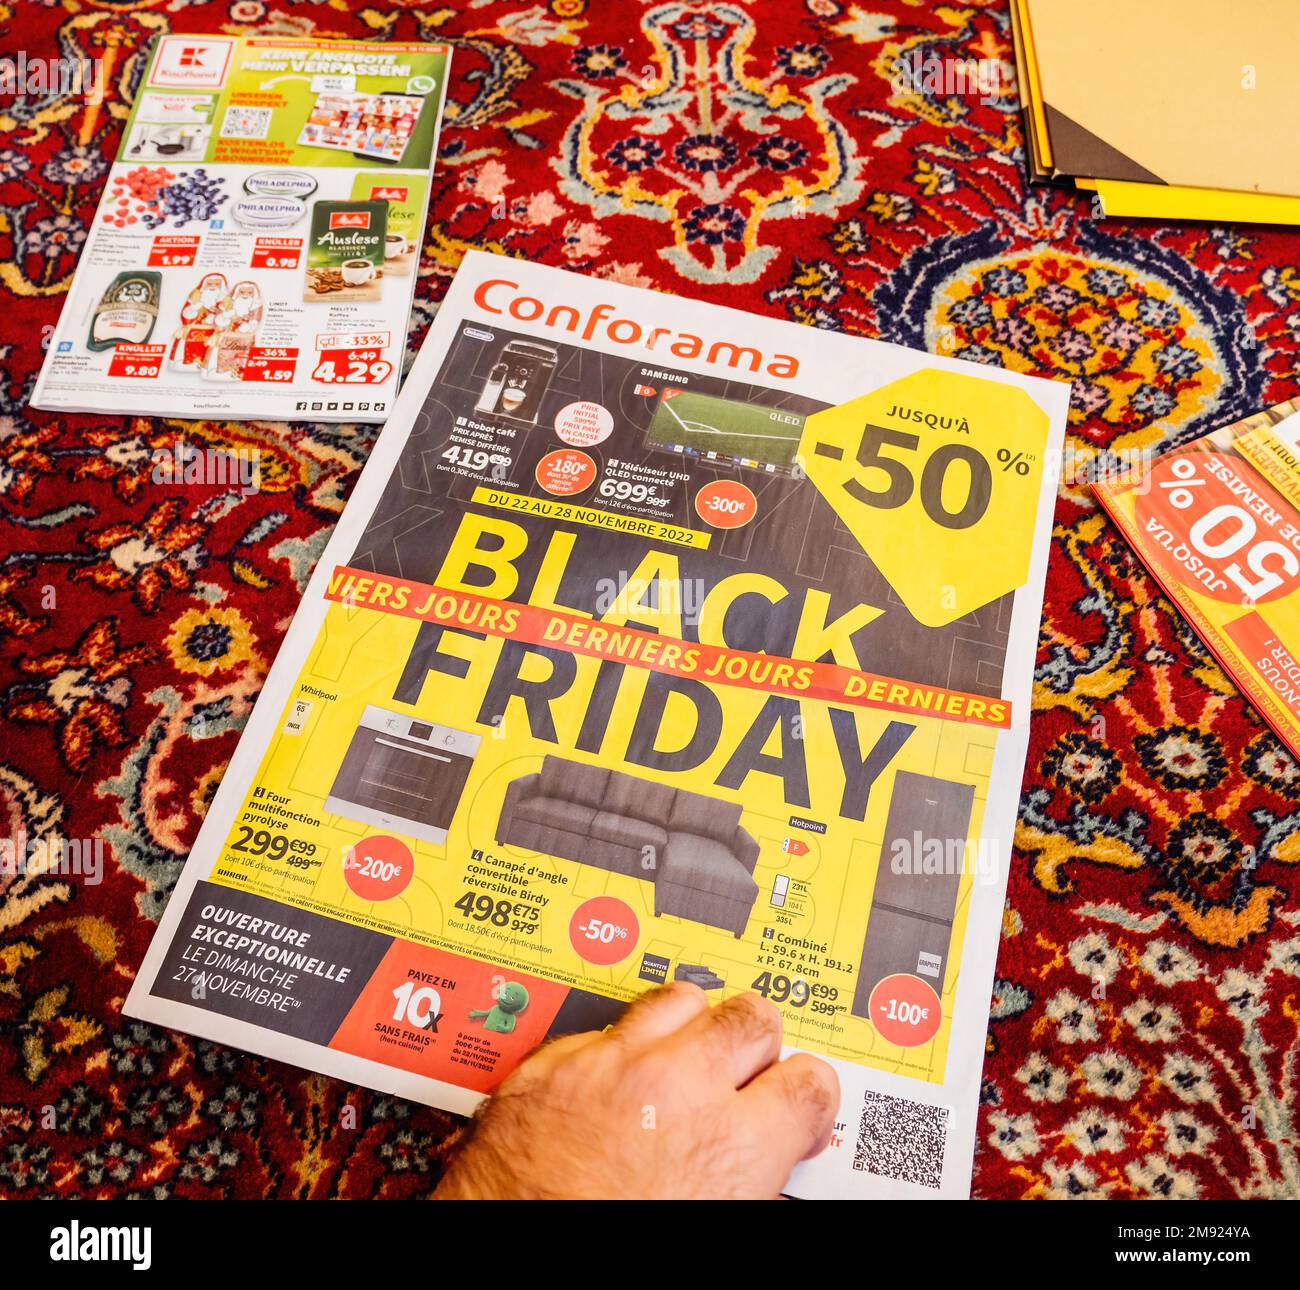 Paris, France - Dec 2, 2022: Advertising leaflets of Conforama supermarket chain selling furniture, electronics home object - man reading on the living room silk rug Stock Photo